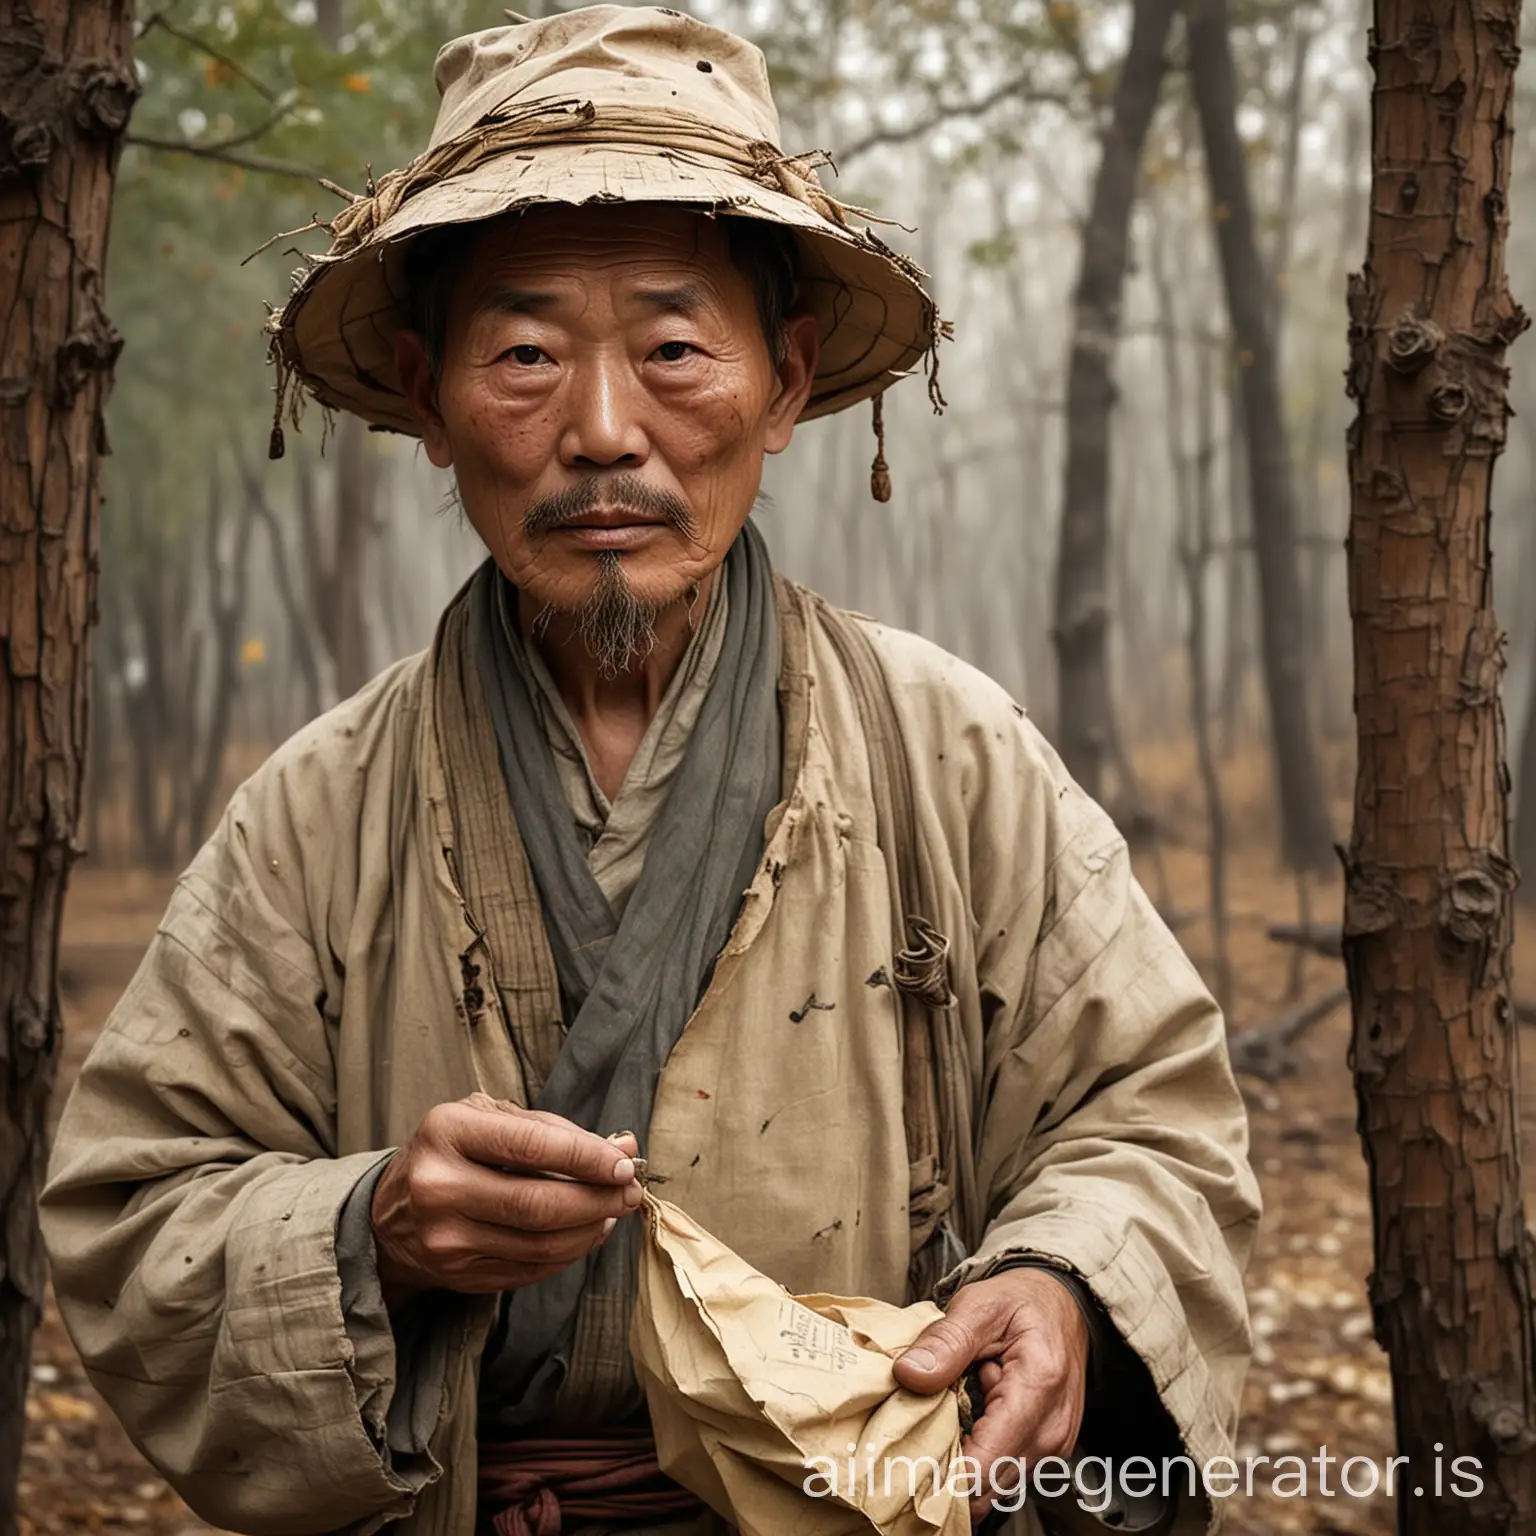 Middleaged-Chinese-Laborer-of-the-Republican-Era-with-Tobacco-Pipe-and-Tattered-Hat